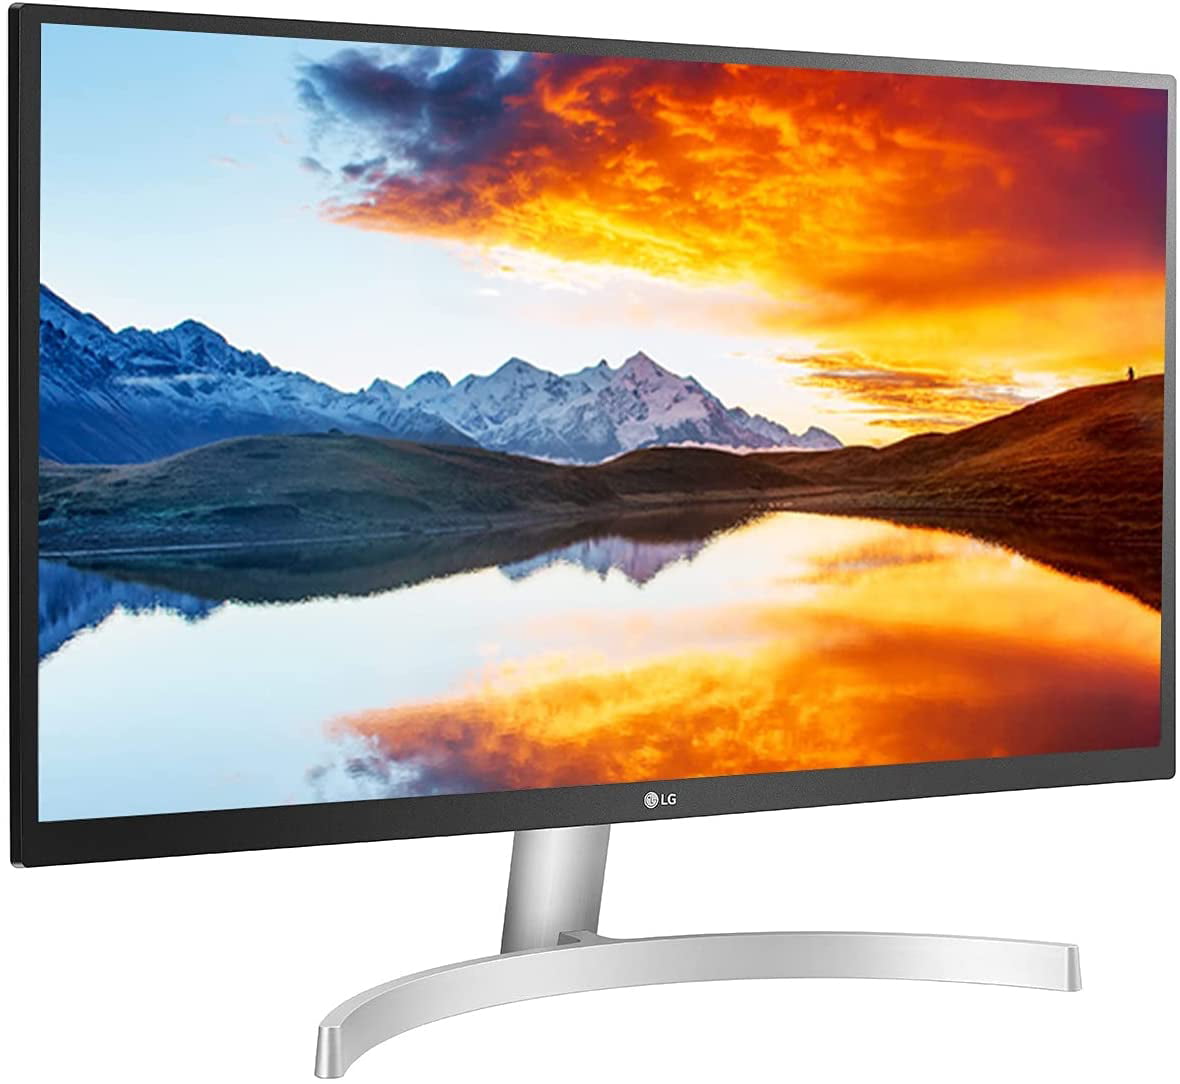 snigmord Afvigelse gyldige LG 27UL500-W 27" Class 4K UHD IPS LED with HDR10 Monitor with an Additional  1 Year Coverage by Epic Protect (2019) - Walmart.com